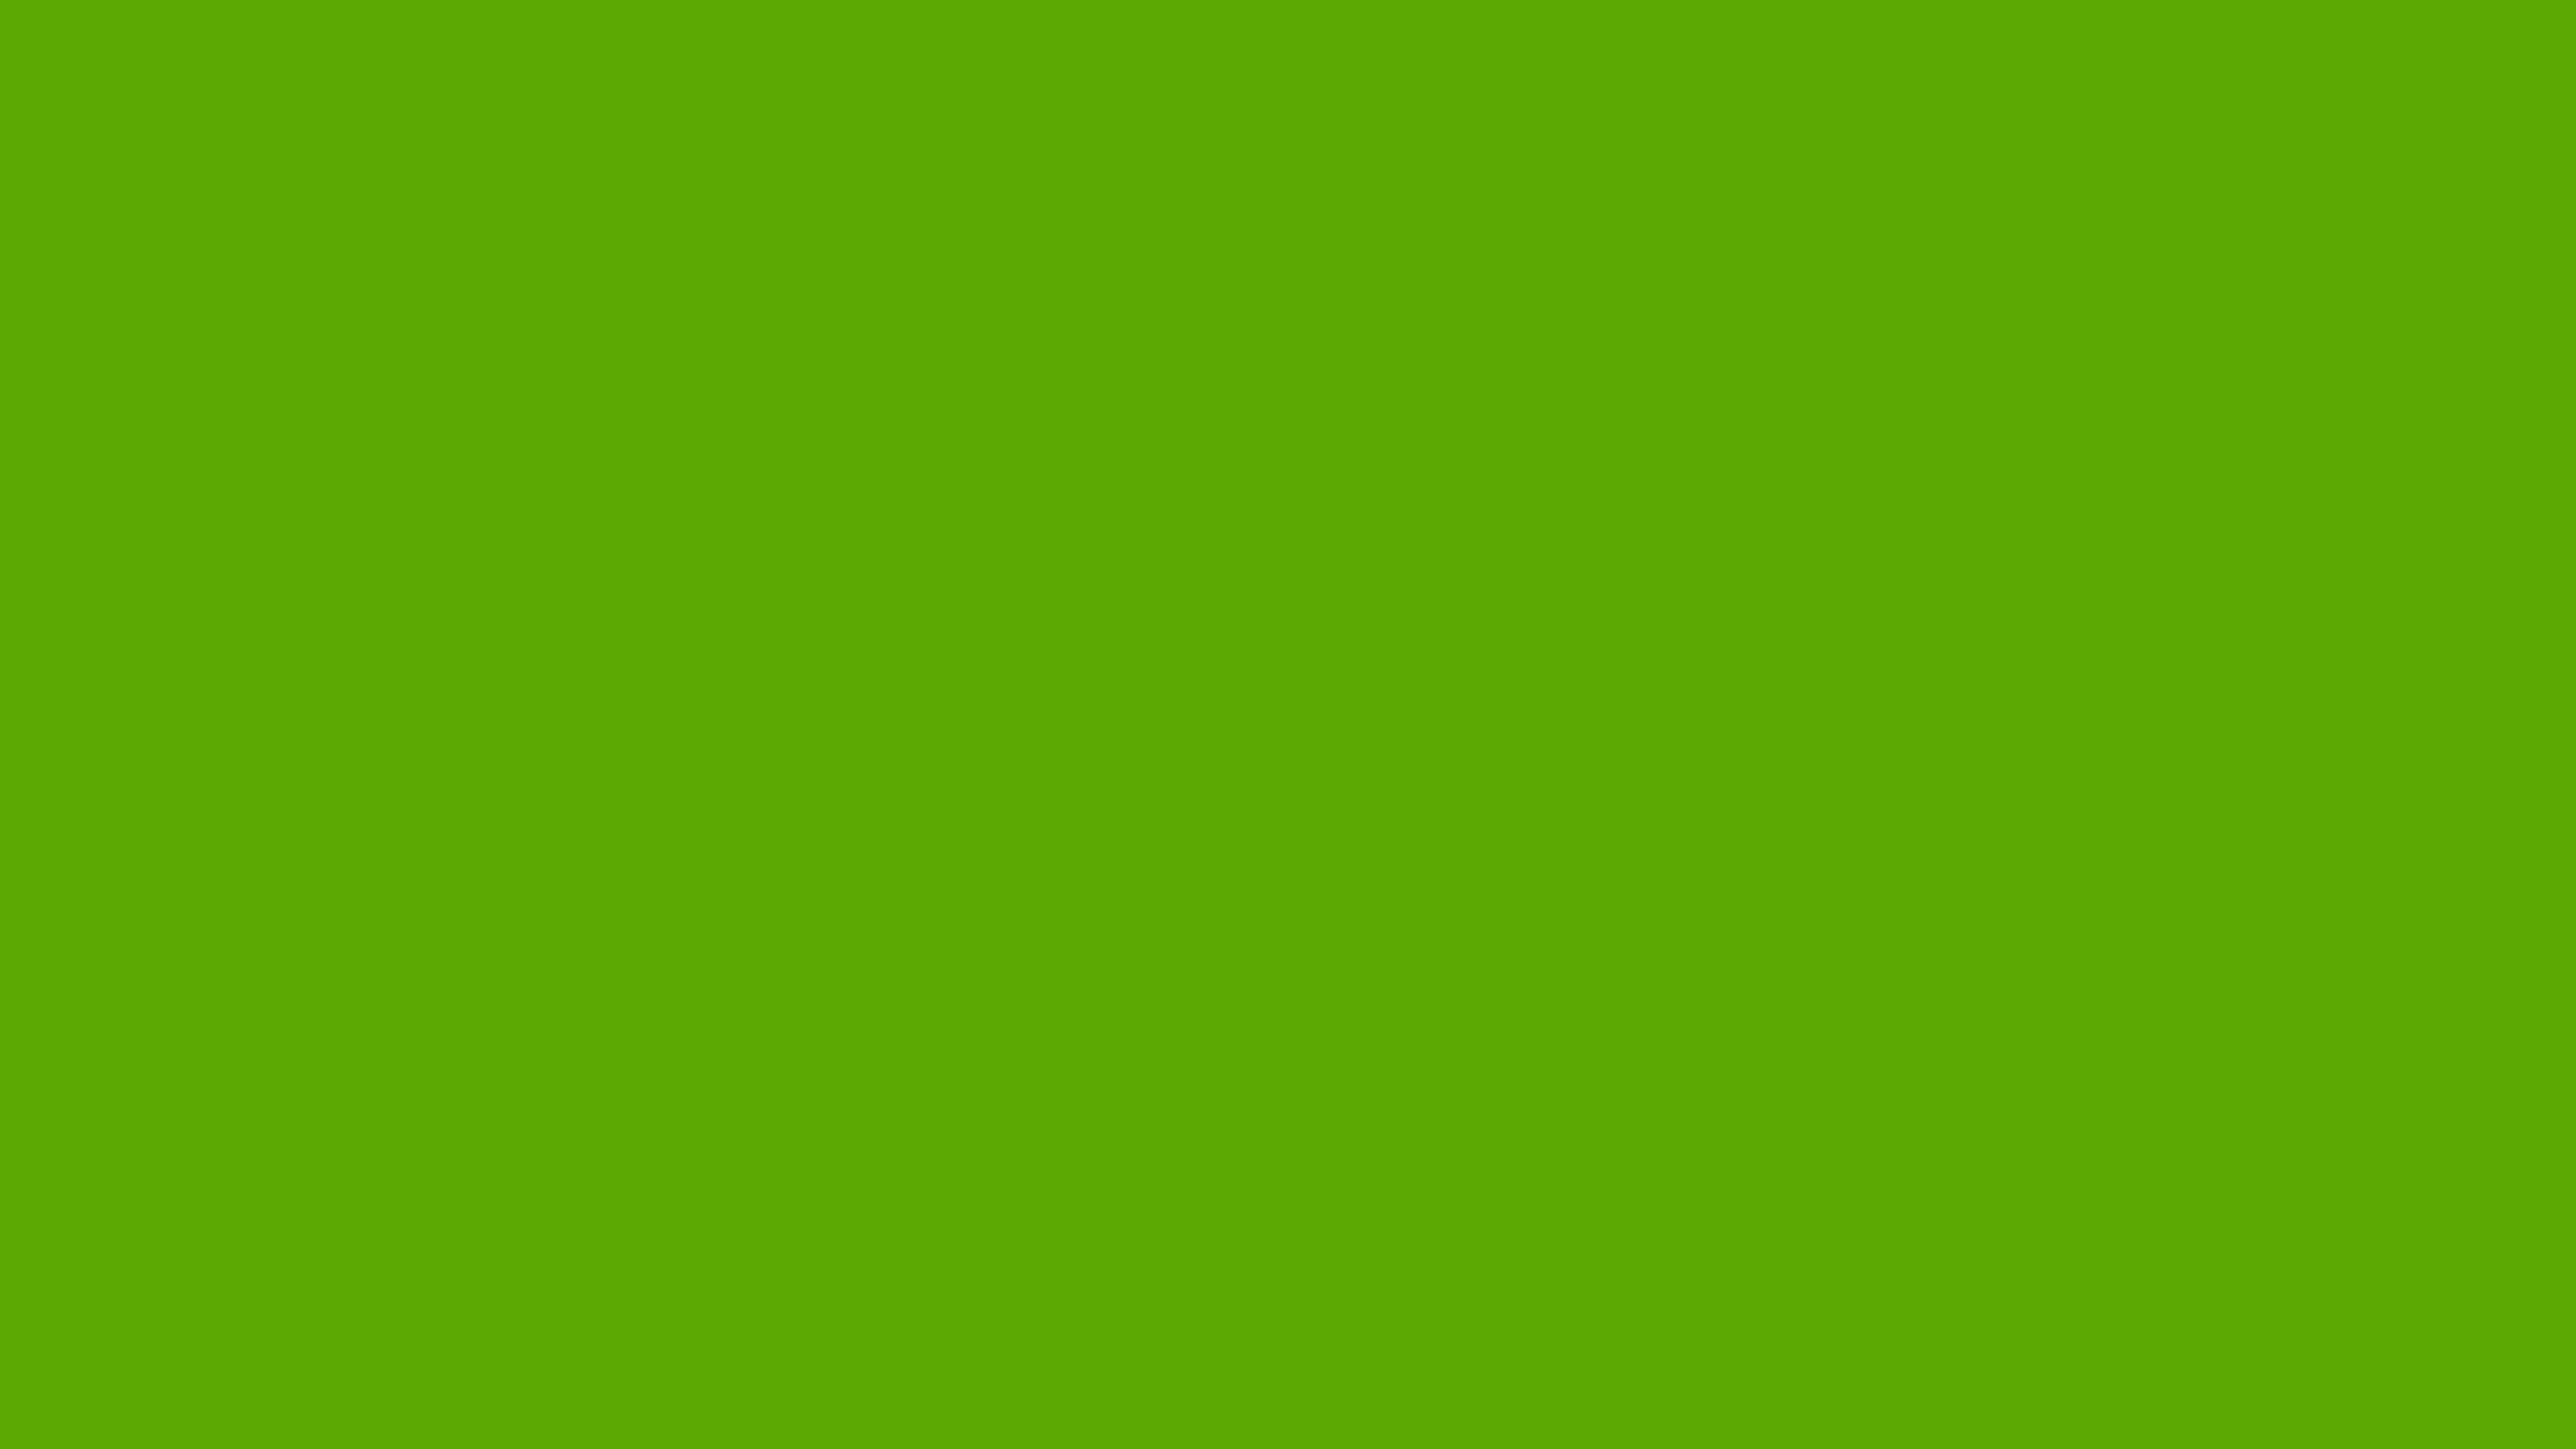 Shades XKCD Color leaf green #5ca904 hex colors palette - ColorsWall